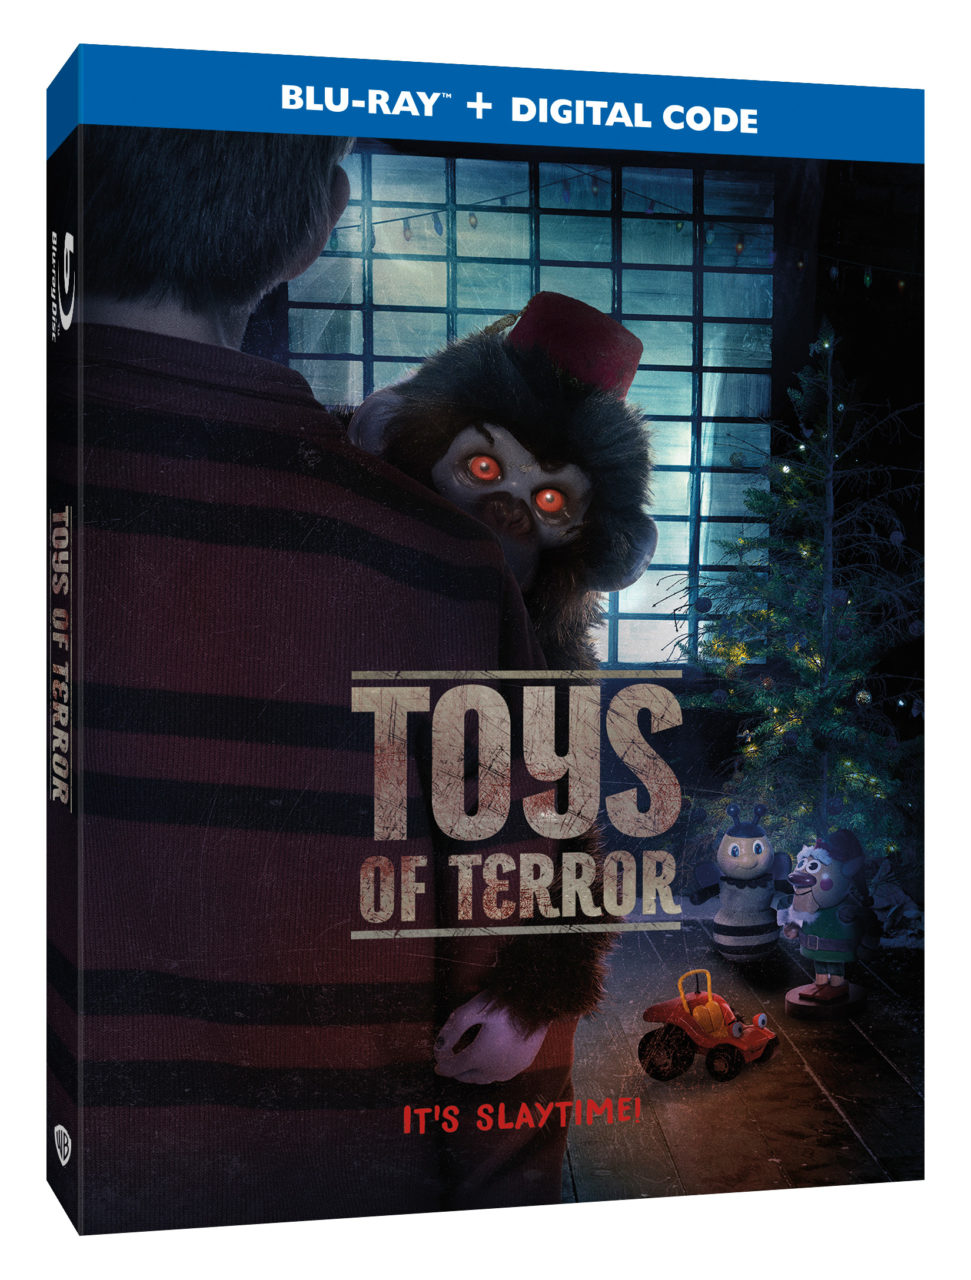 Toys Of Terror Blu-Ray Combo Pack cover (Warner Bros. Home Entertainment)